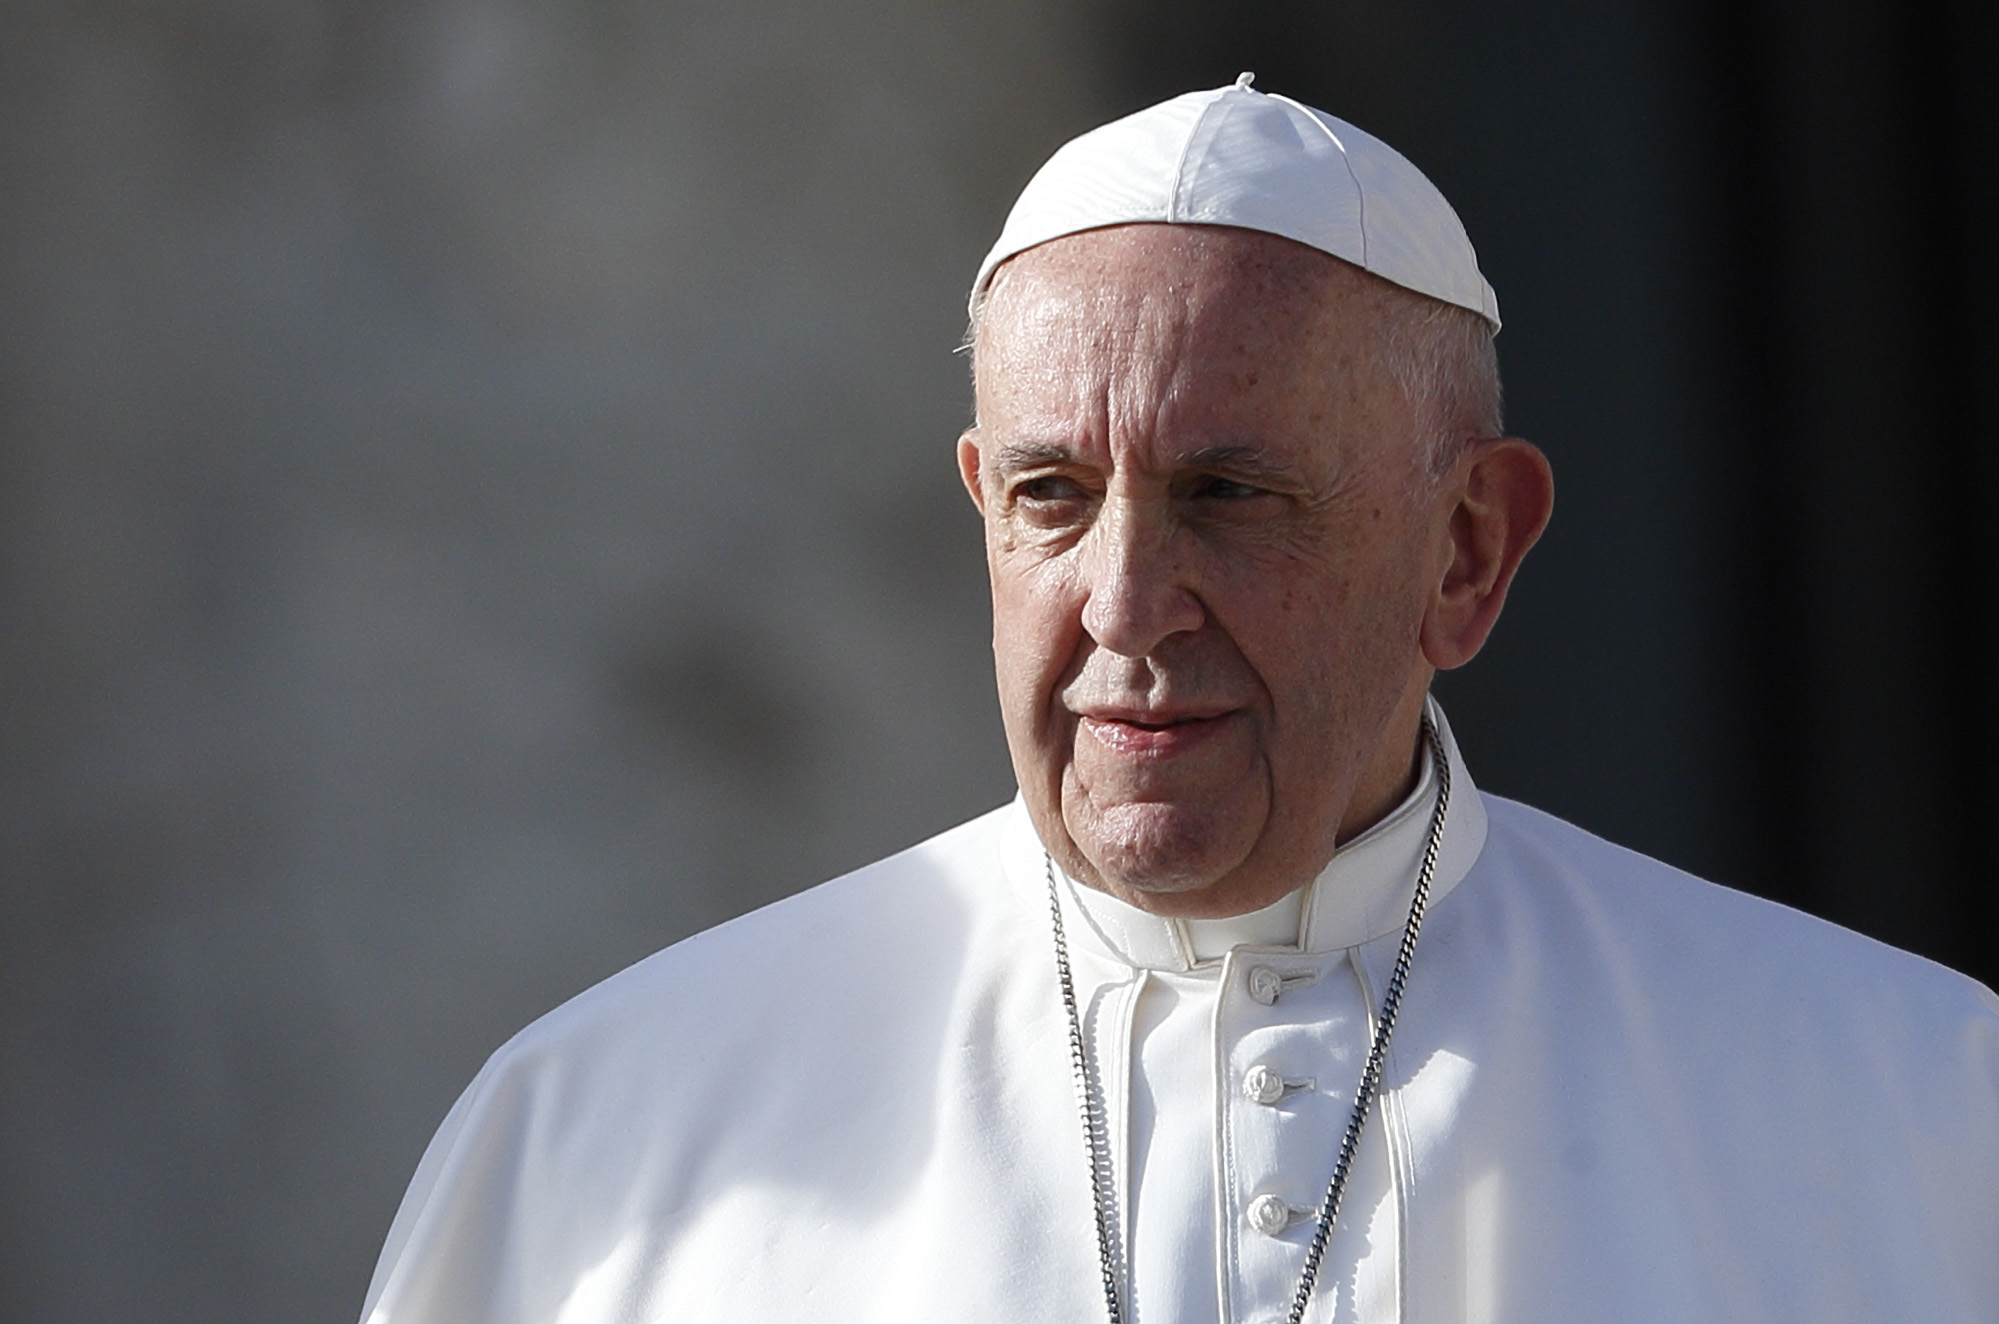 Gays must leave priesthood if they cannot be celibate, says Pope